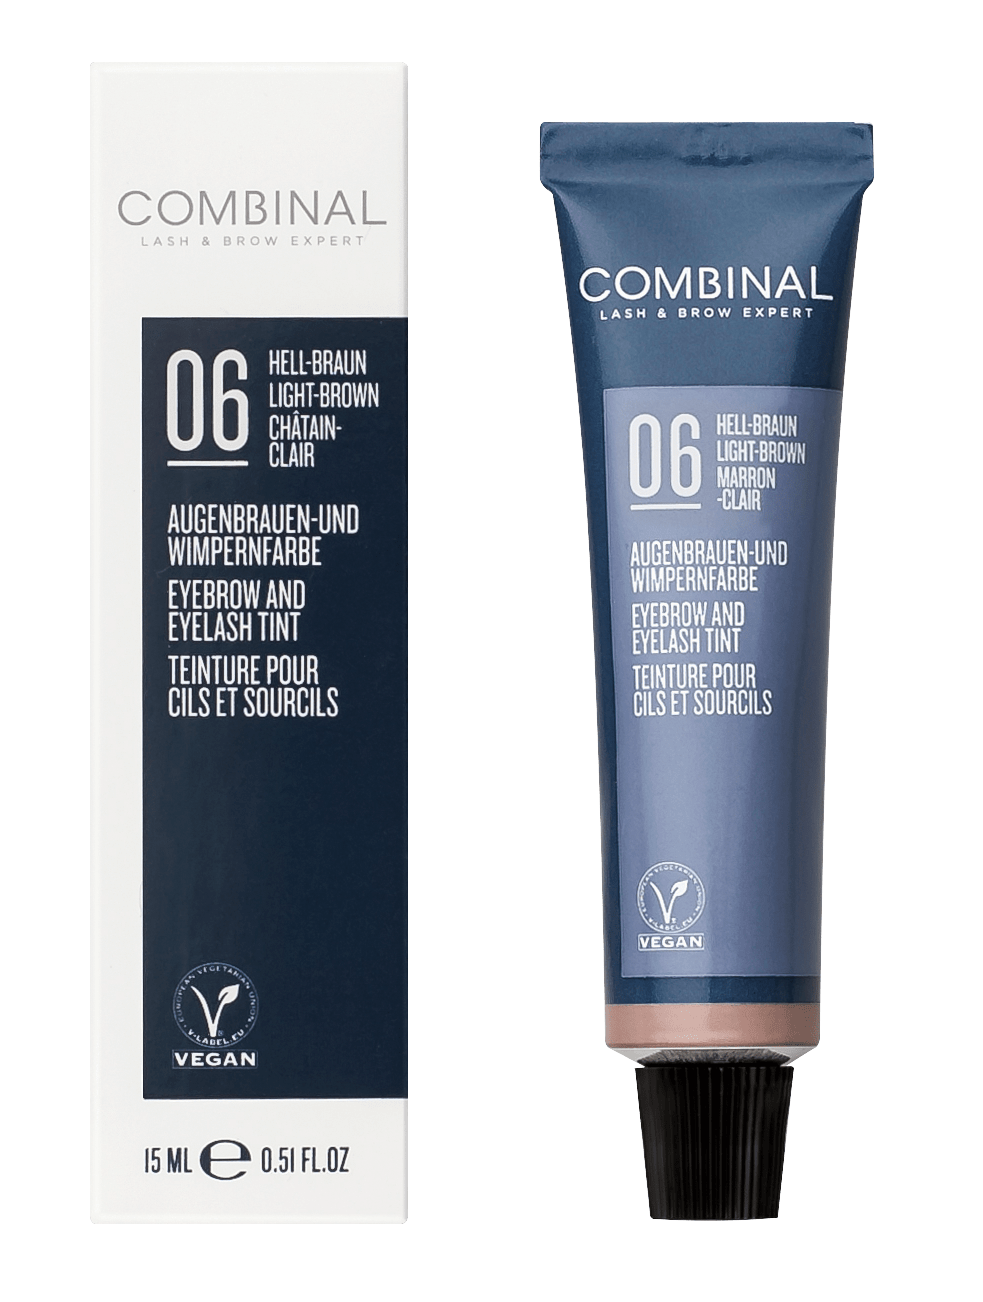 COMBINAL - Wimpernfarbe, 15 ml in hellbraun